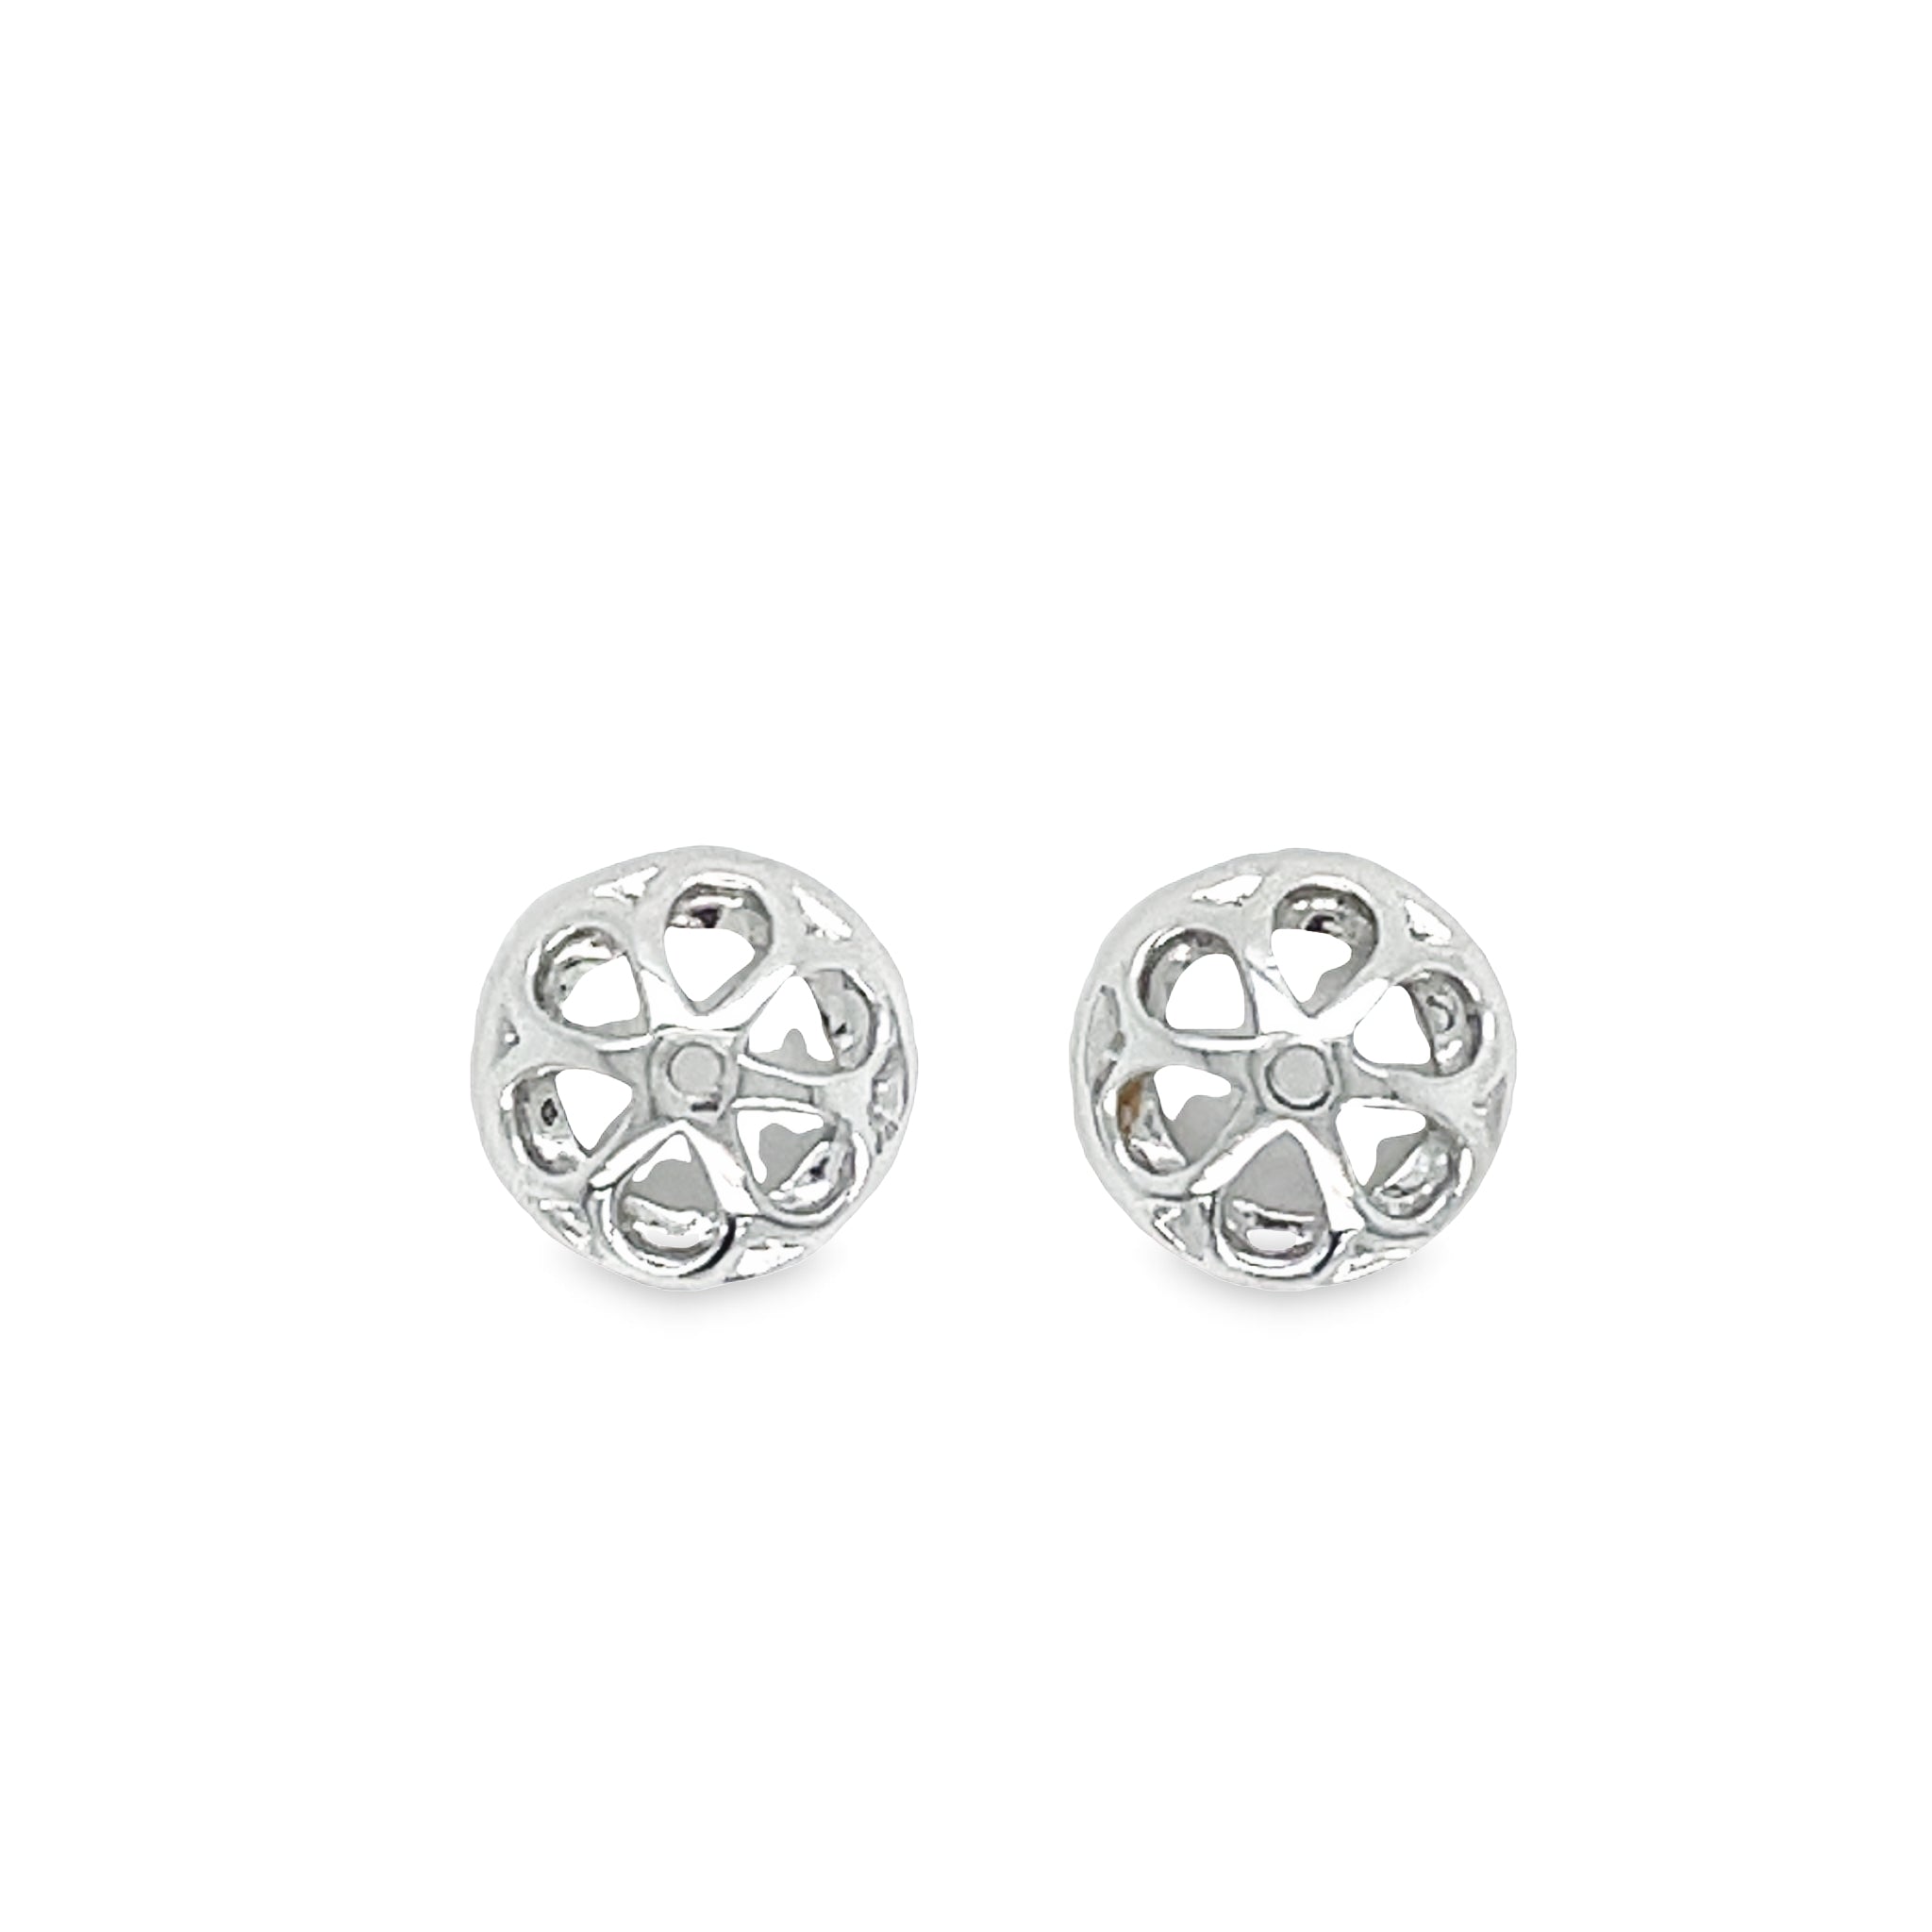 Let your sparkle shine with these stunning Small Removable Round Diamond Jacket Earrings! Crafted of 18k white gold, these earrings feature round diamonds 0.34 cts that will have you dazzling. Show off the ultimate in classic beauty and elegance!  Diamond studs not included 